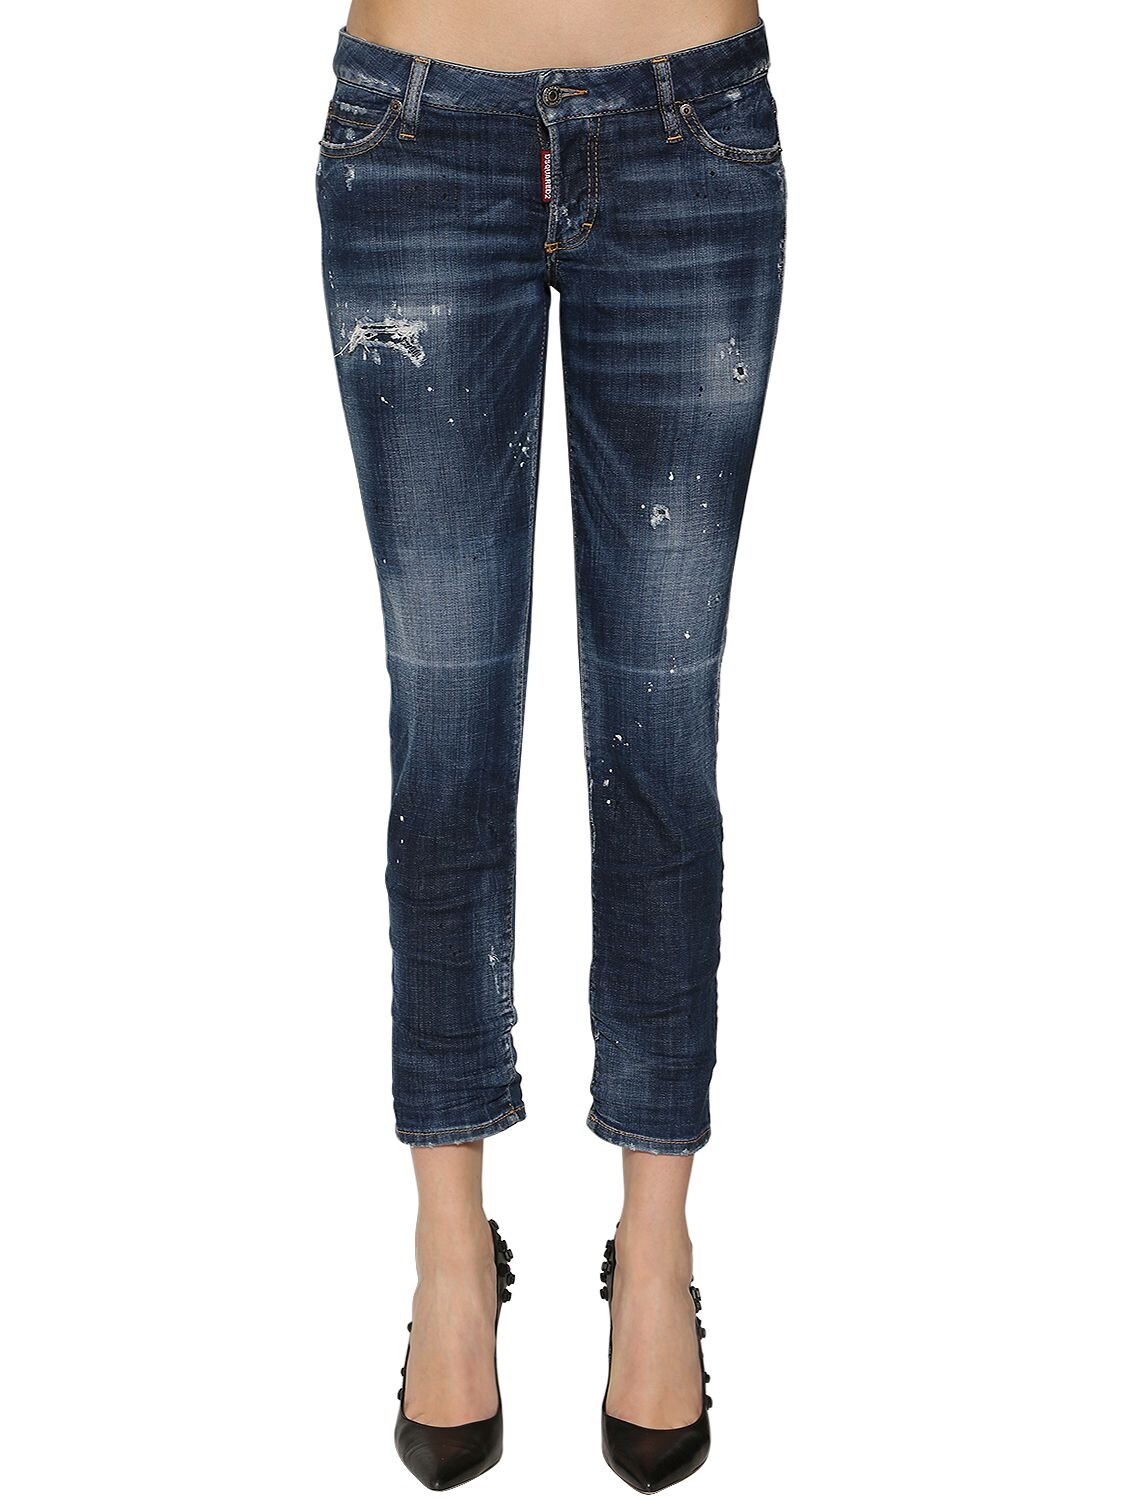 DSQUARED2 JENNIFER CROPPED DESTROYED SKINNY JEANS,68IAGF043-NDCW0